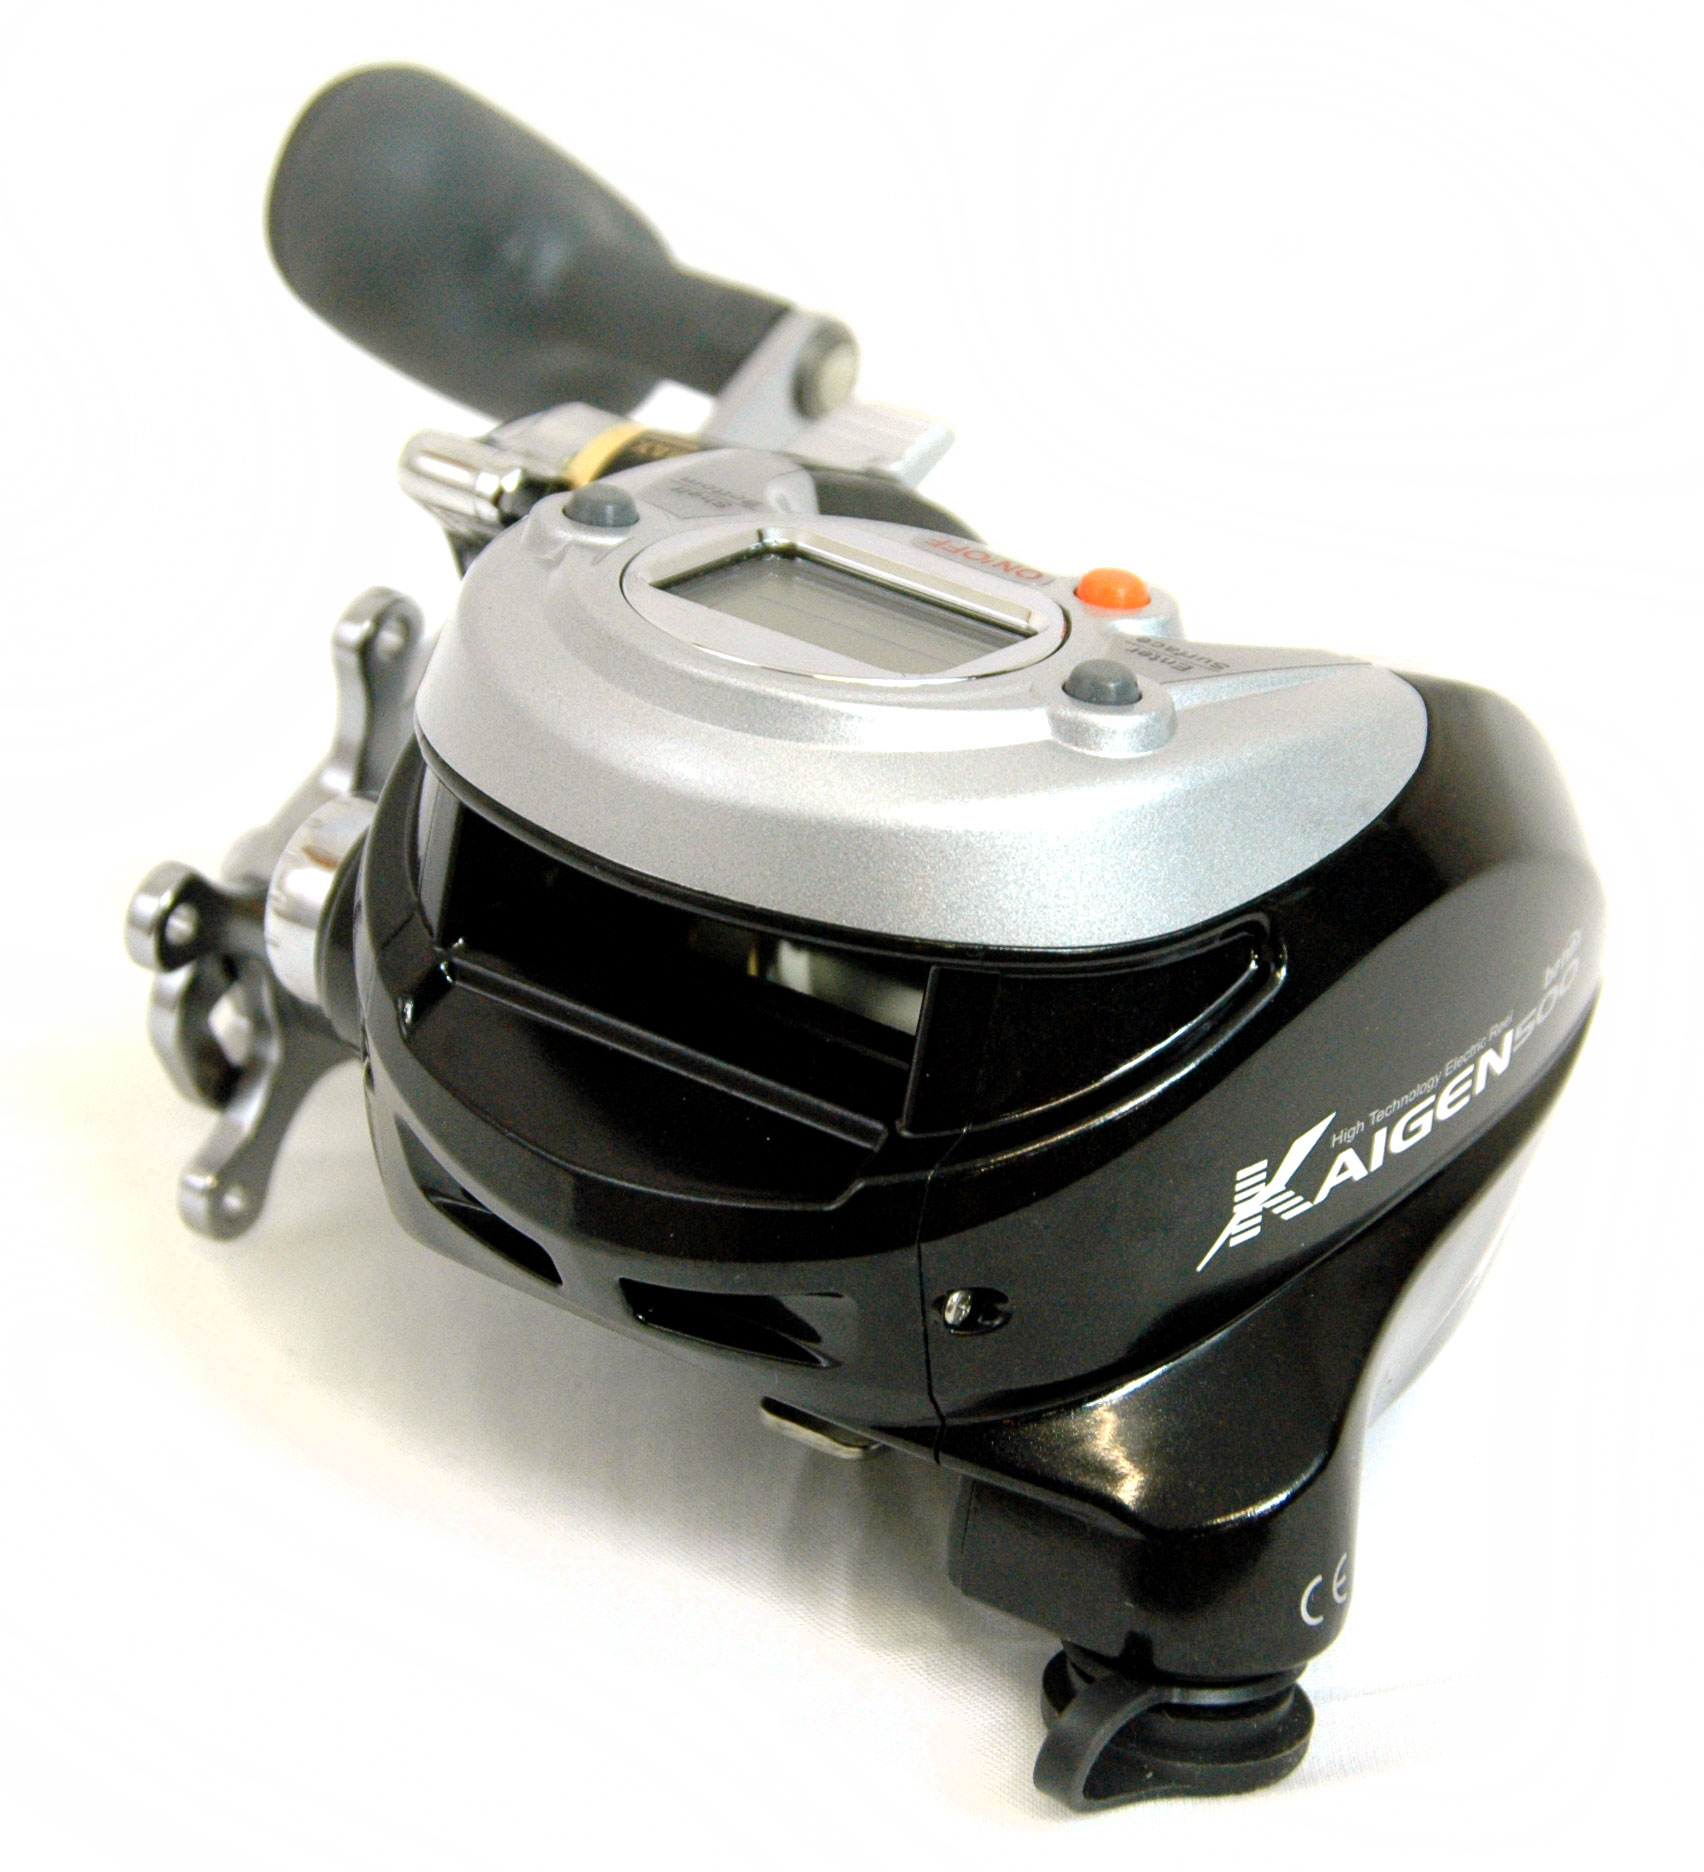 banax electric reel review